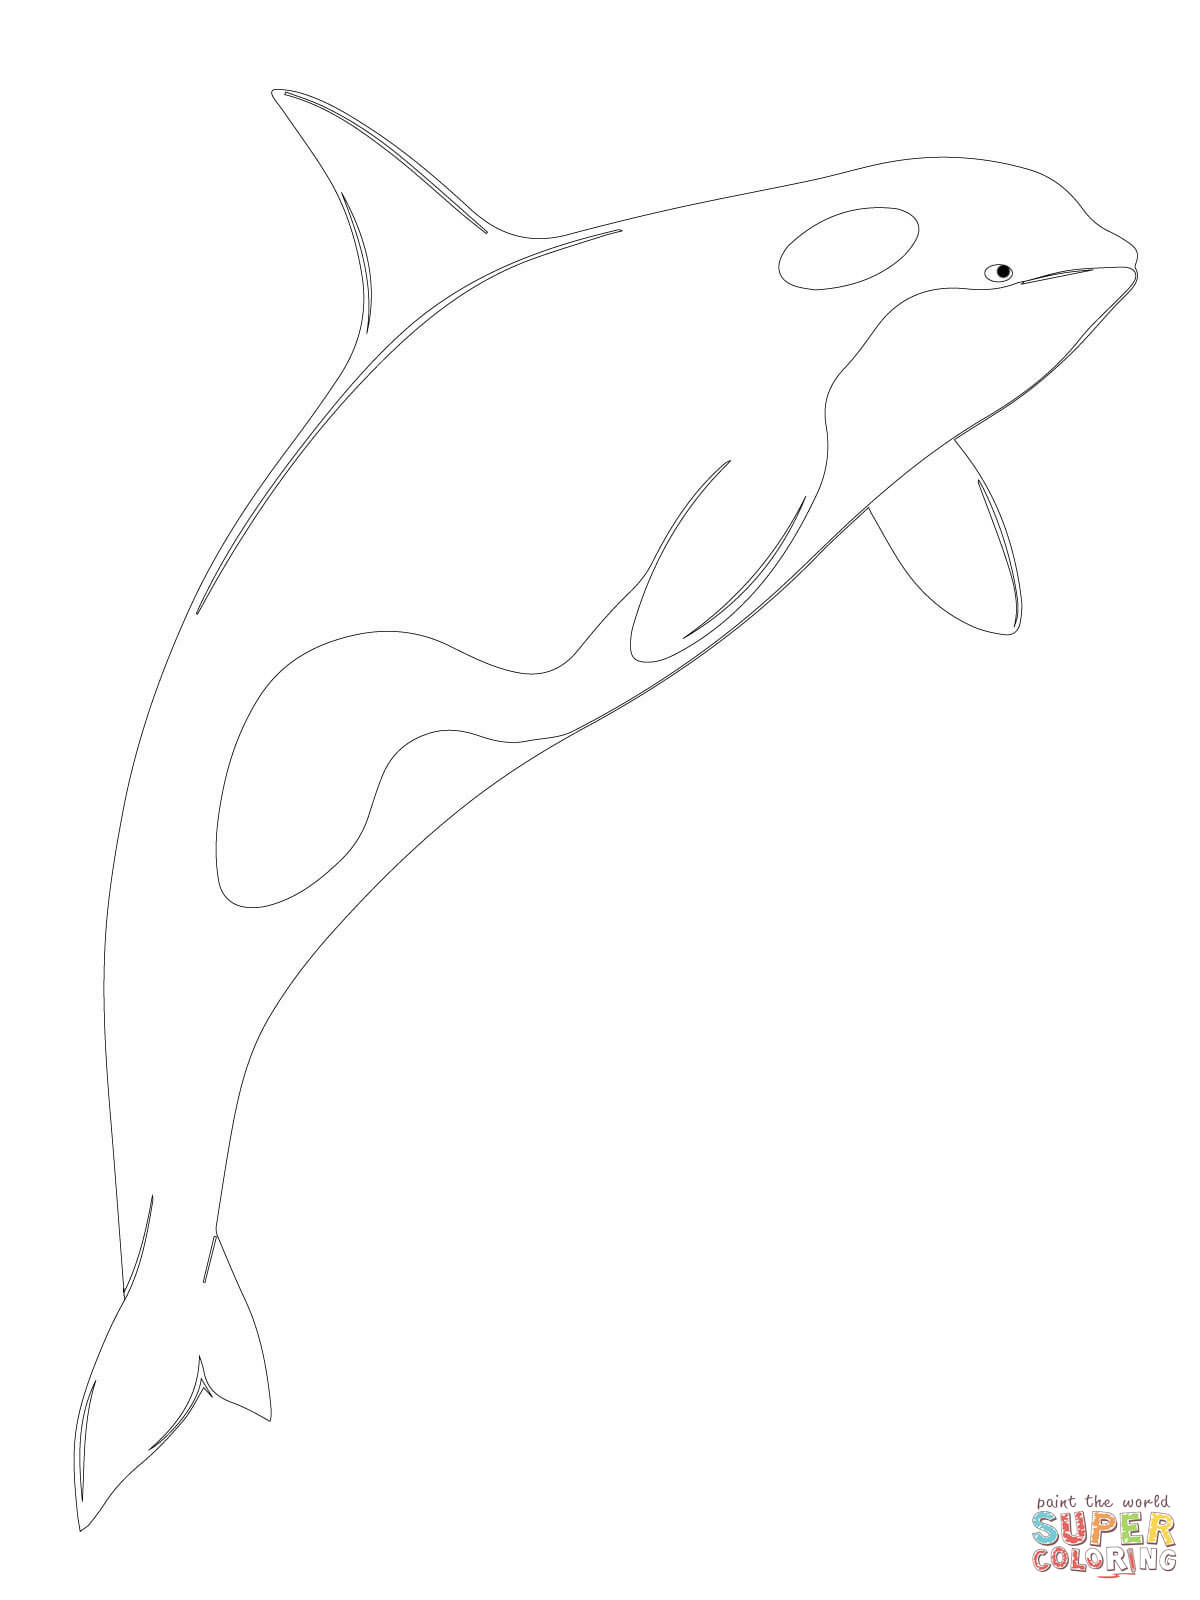 Shamu Coloring Pages Orca Whale Shamu Coloring Page Free Printable Coloring Pages